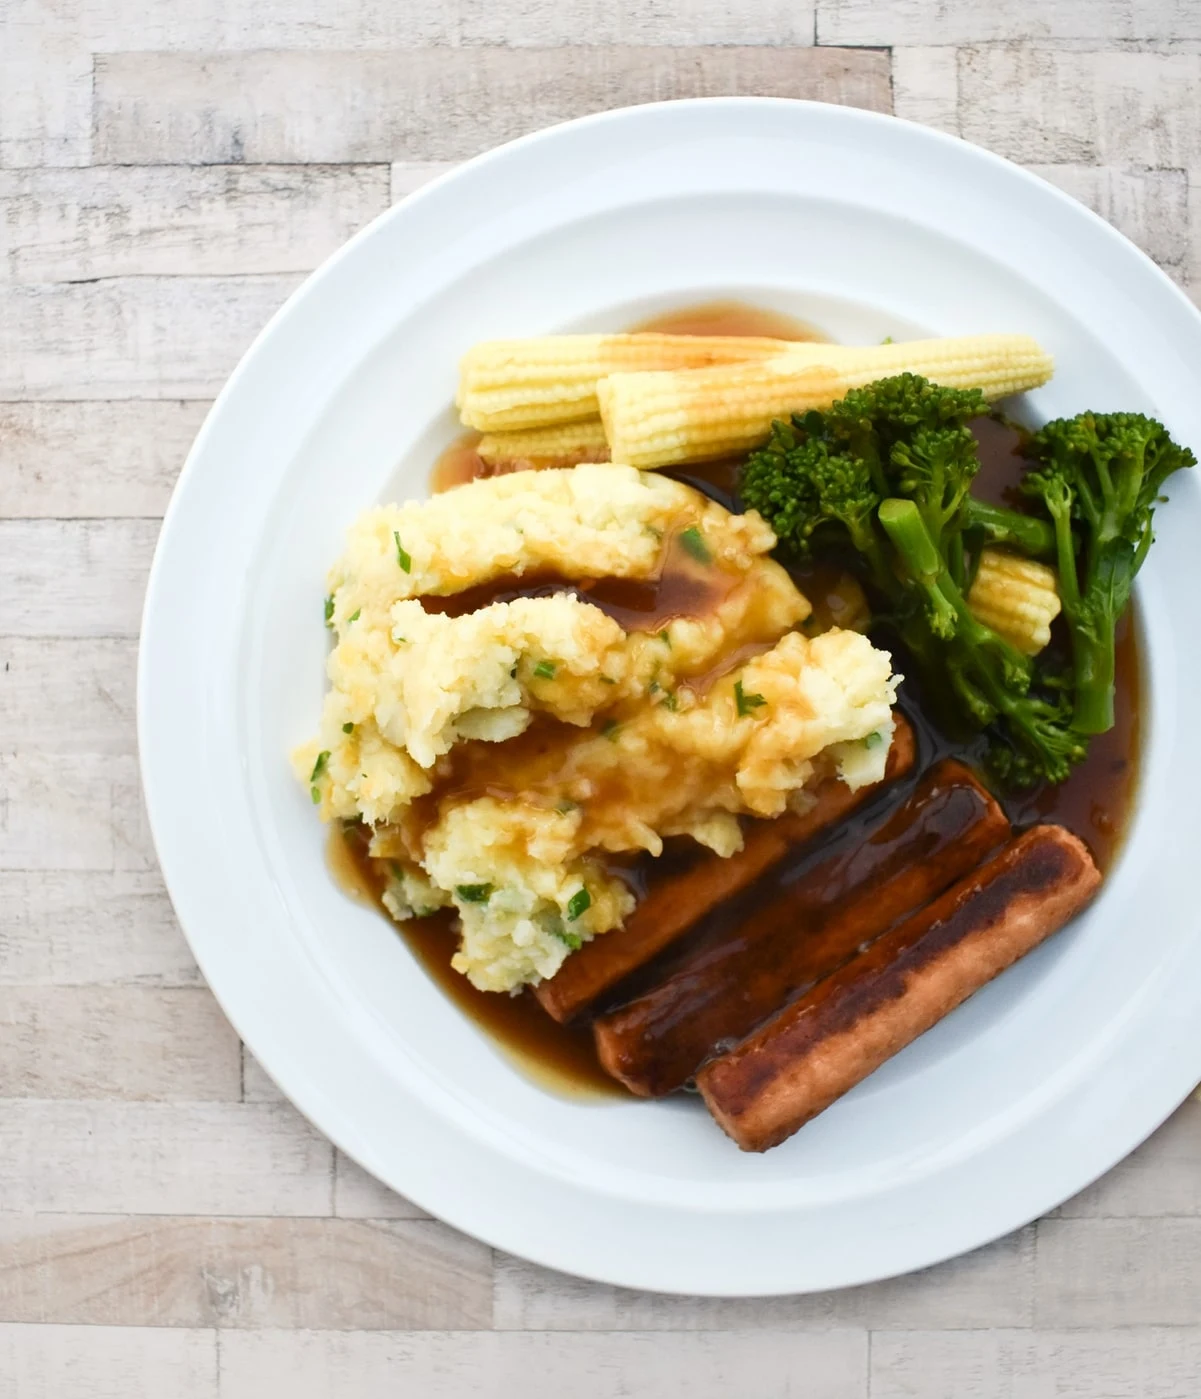 Sausages, veg, clapshot and gravy on a plate.